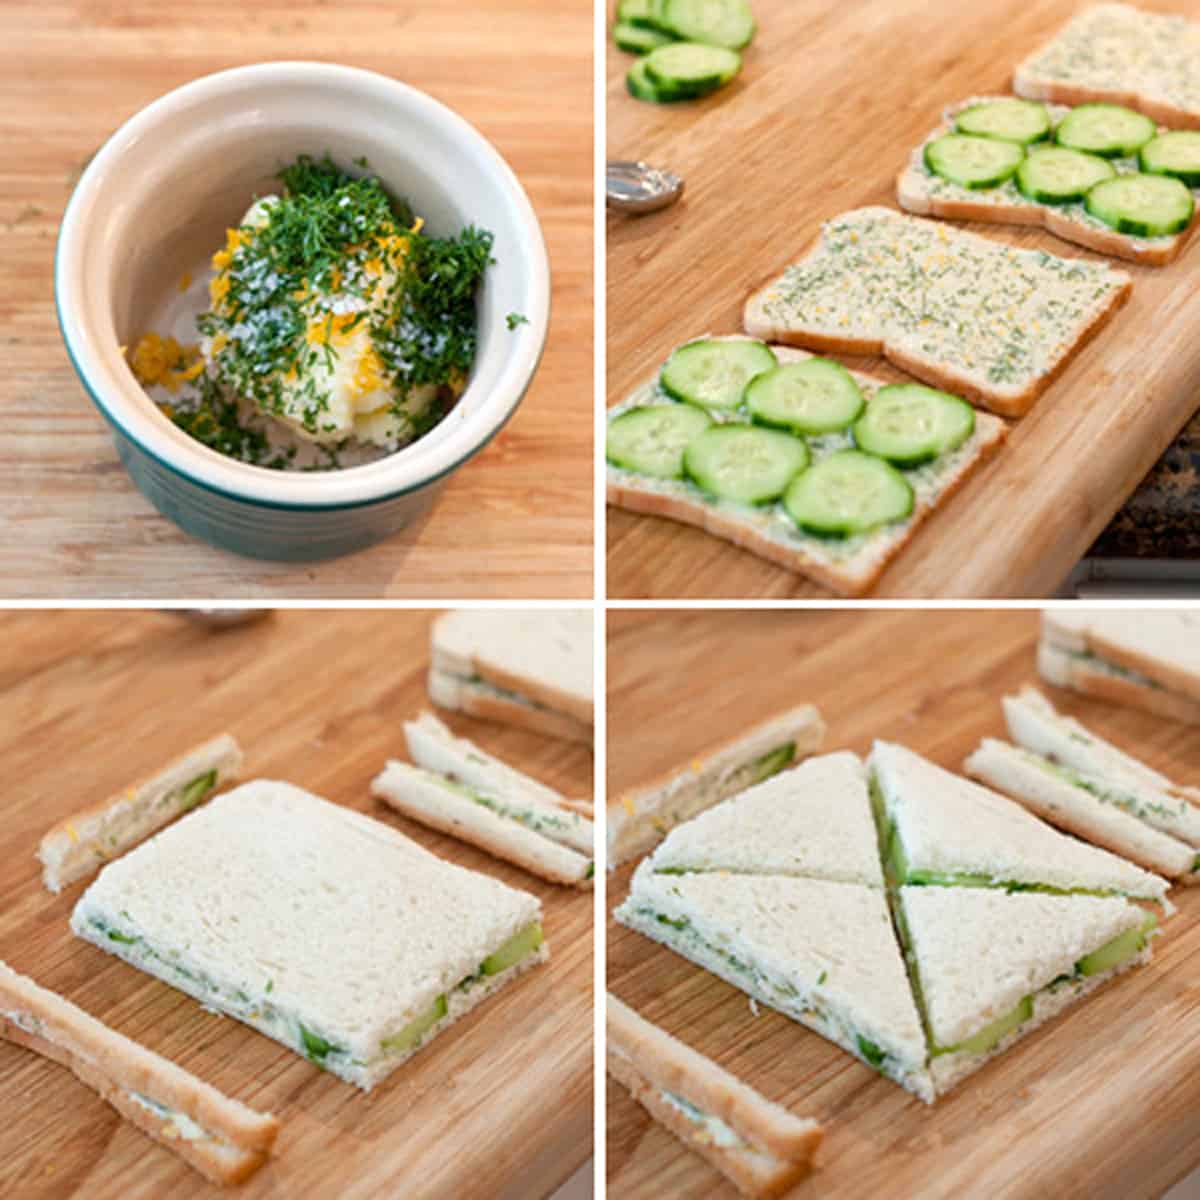 Collage showing how to make cucumber sandwiches.